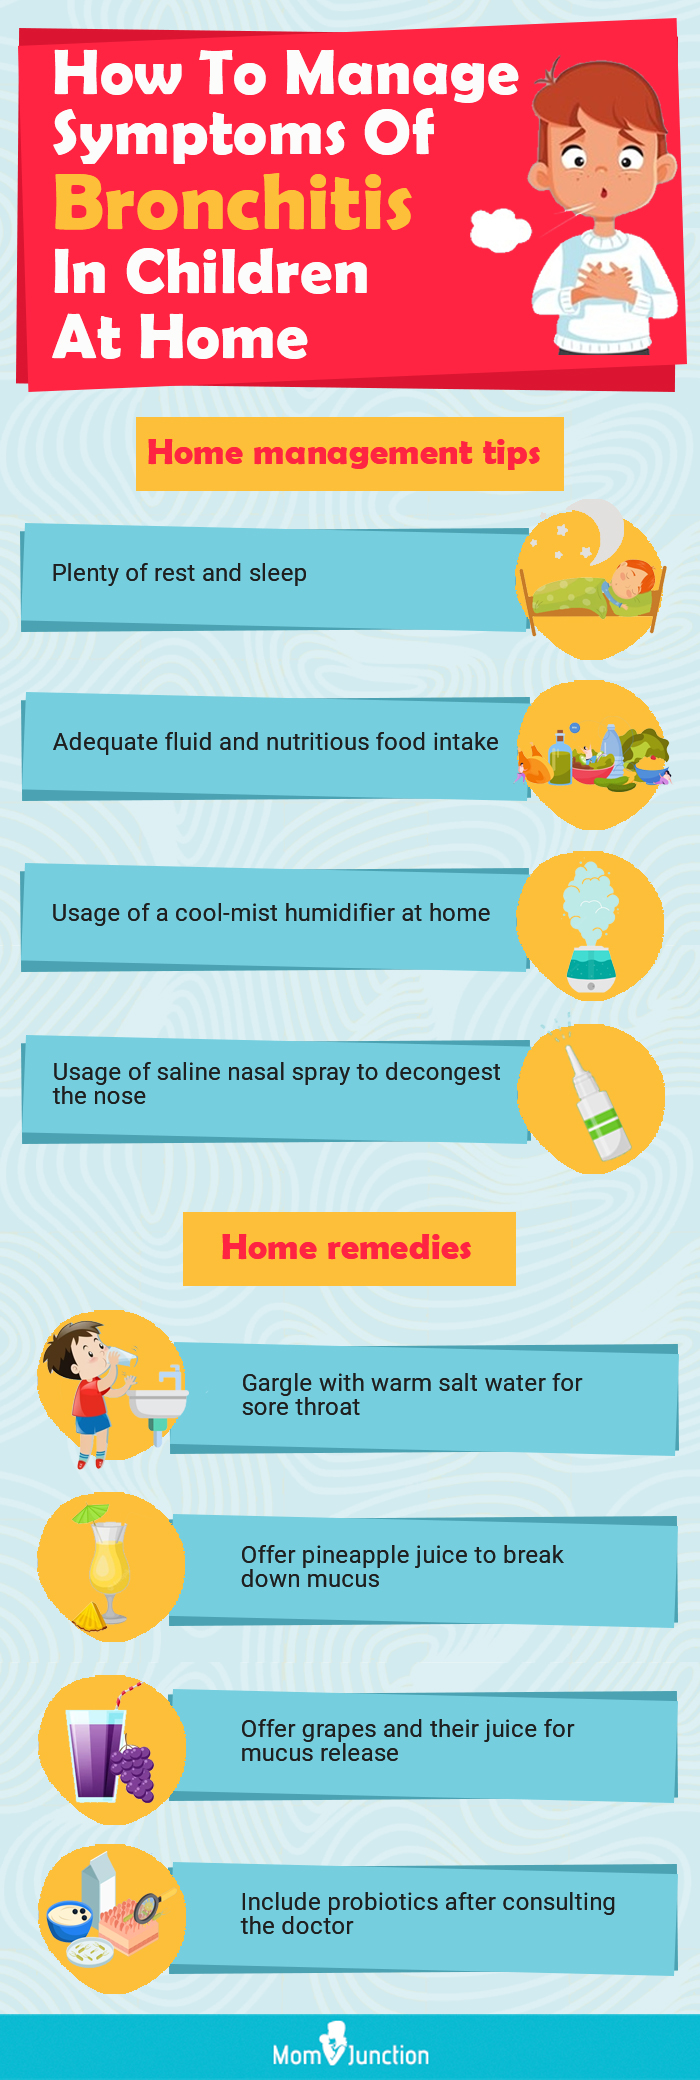 how to manage symptoms of bronchitis in children at home (infographic)